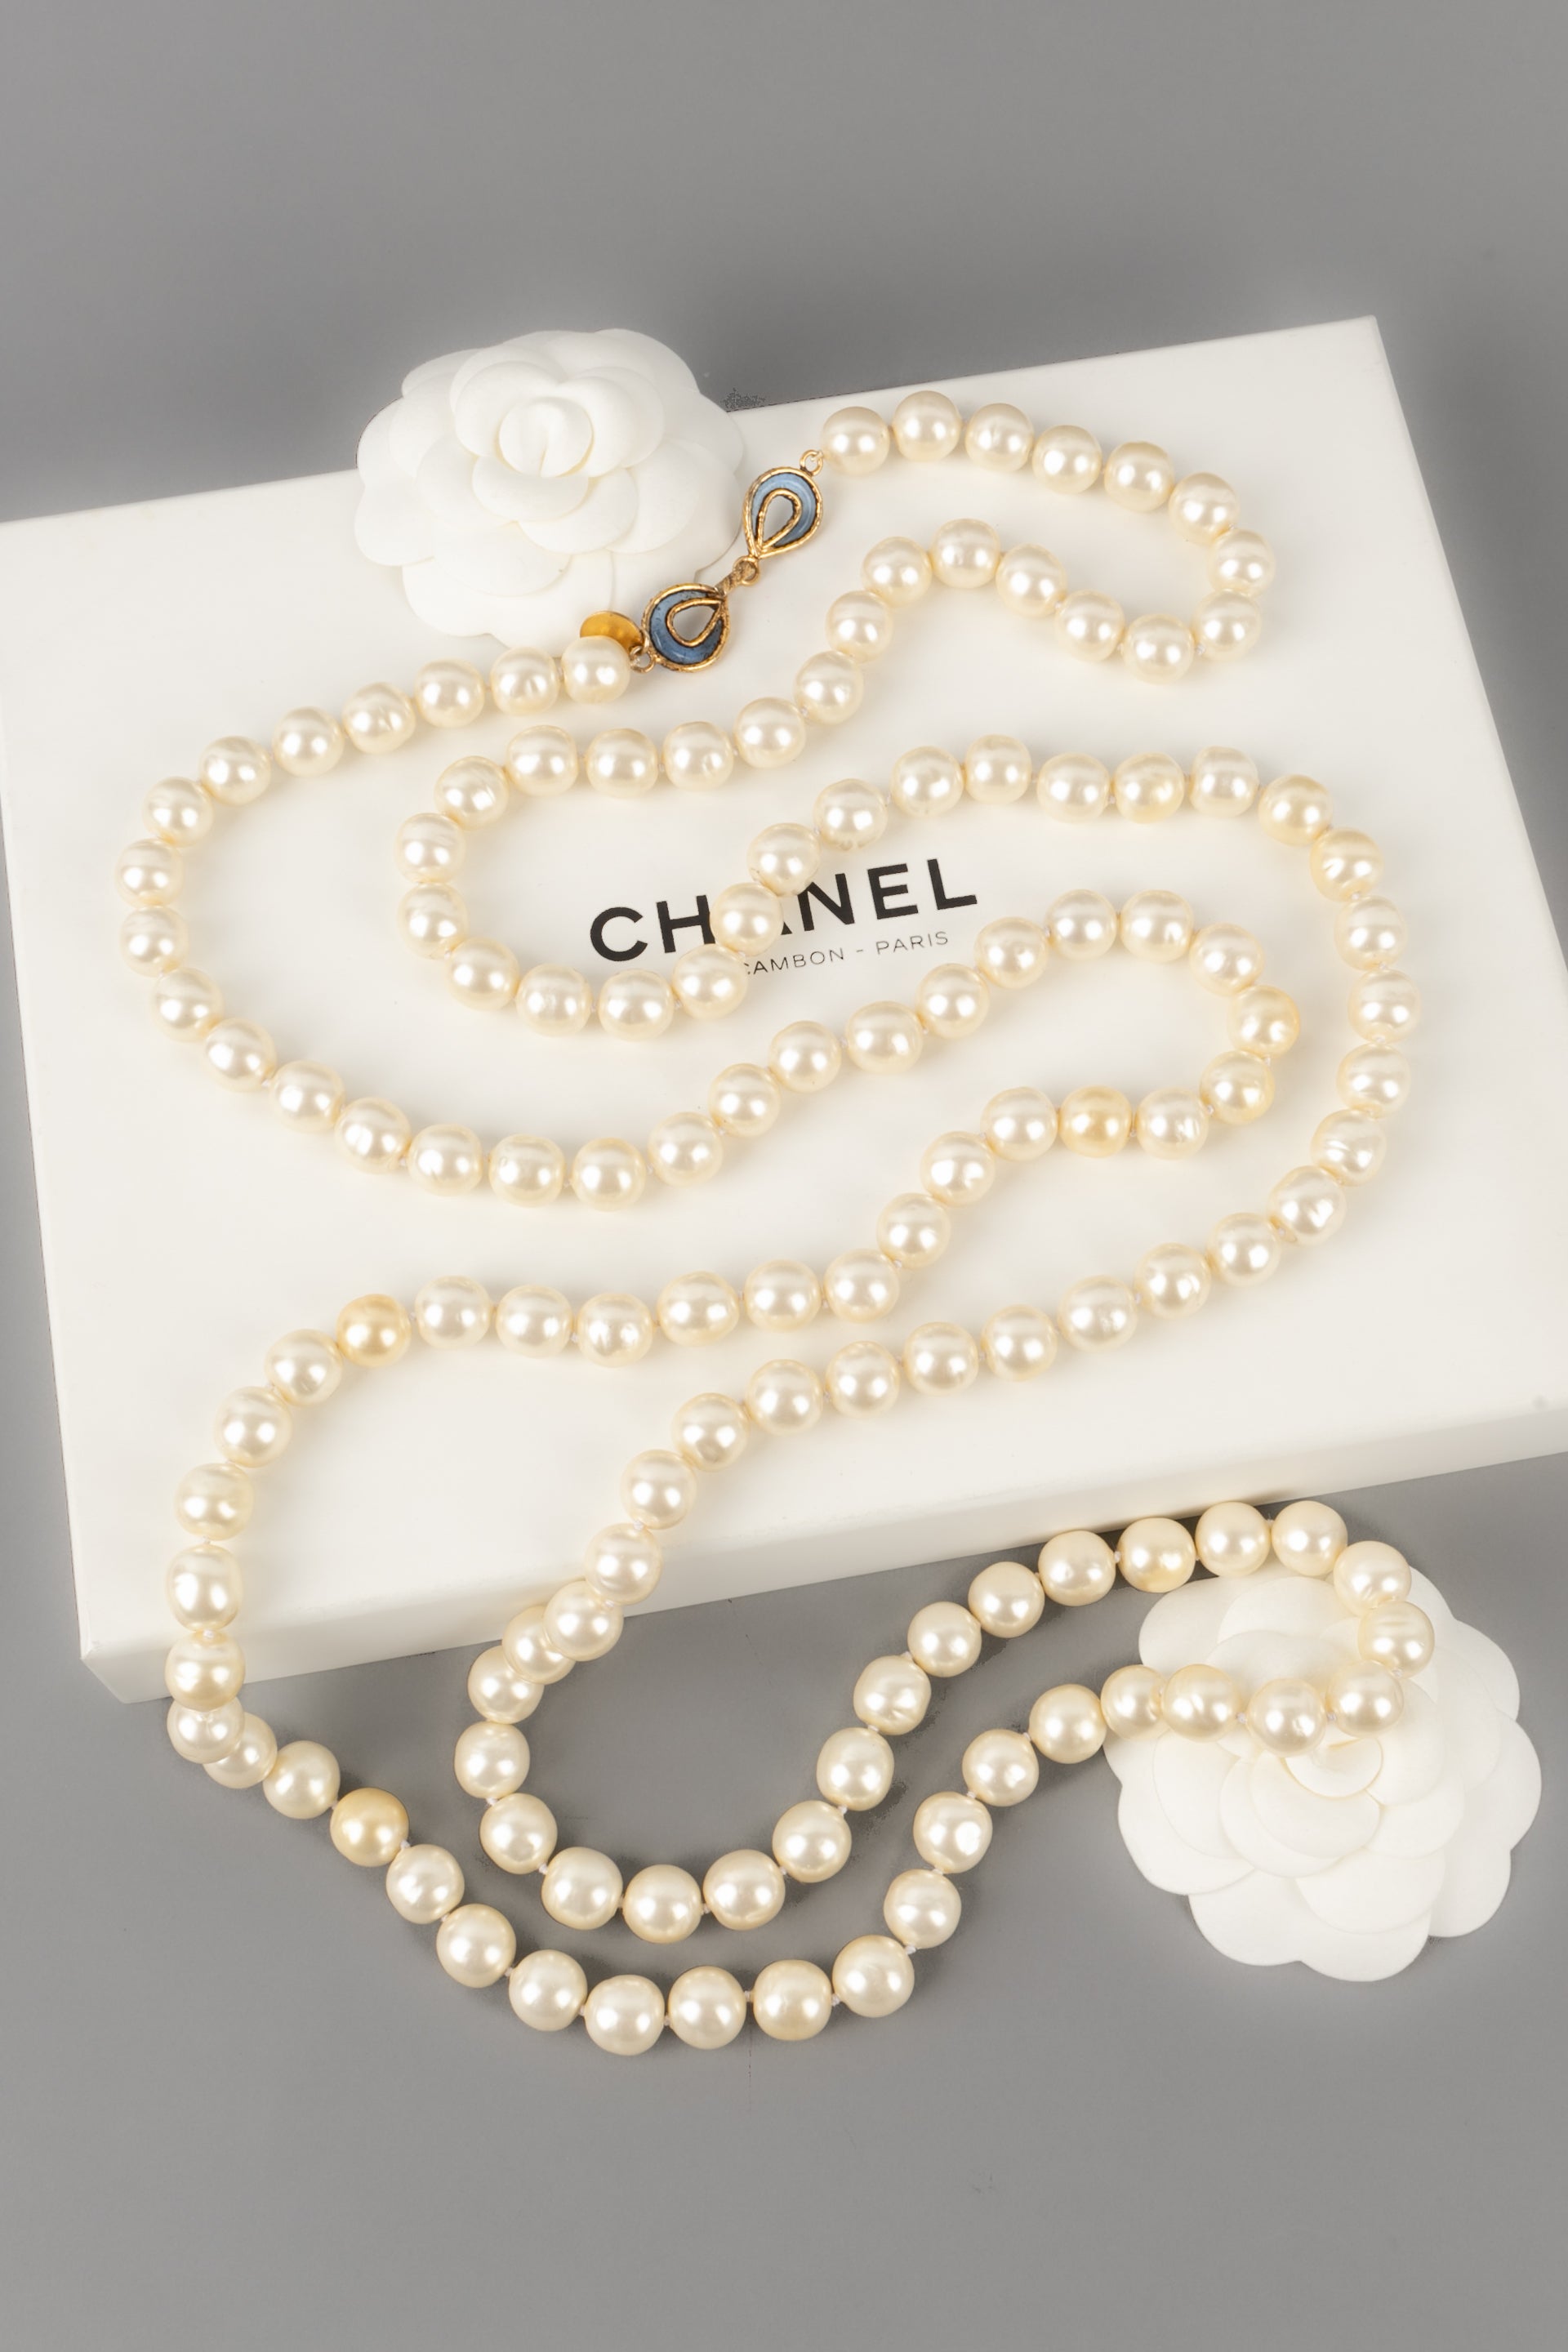 Chanel pearl necklace